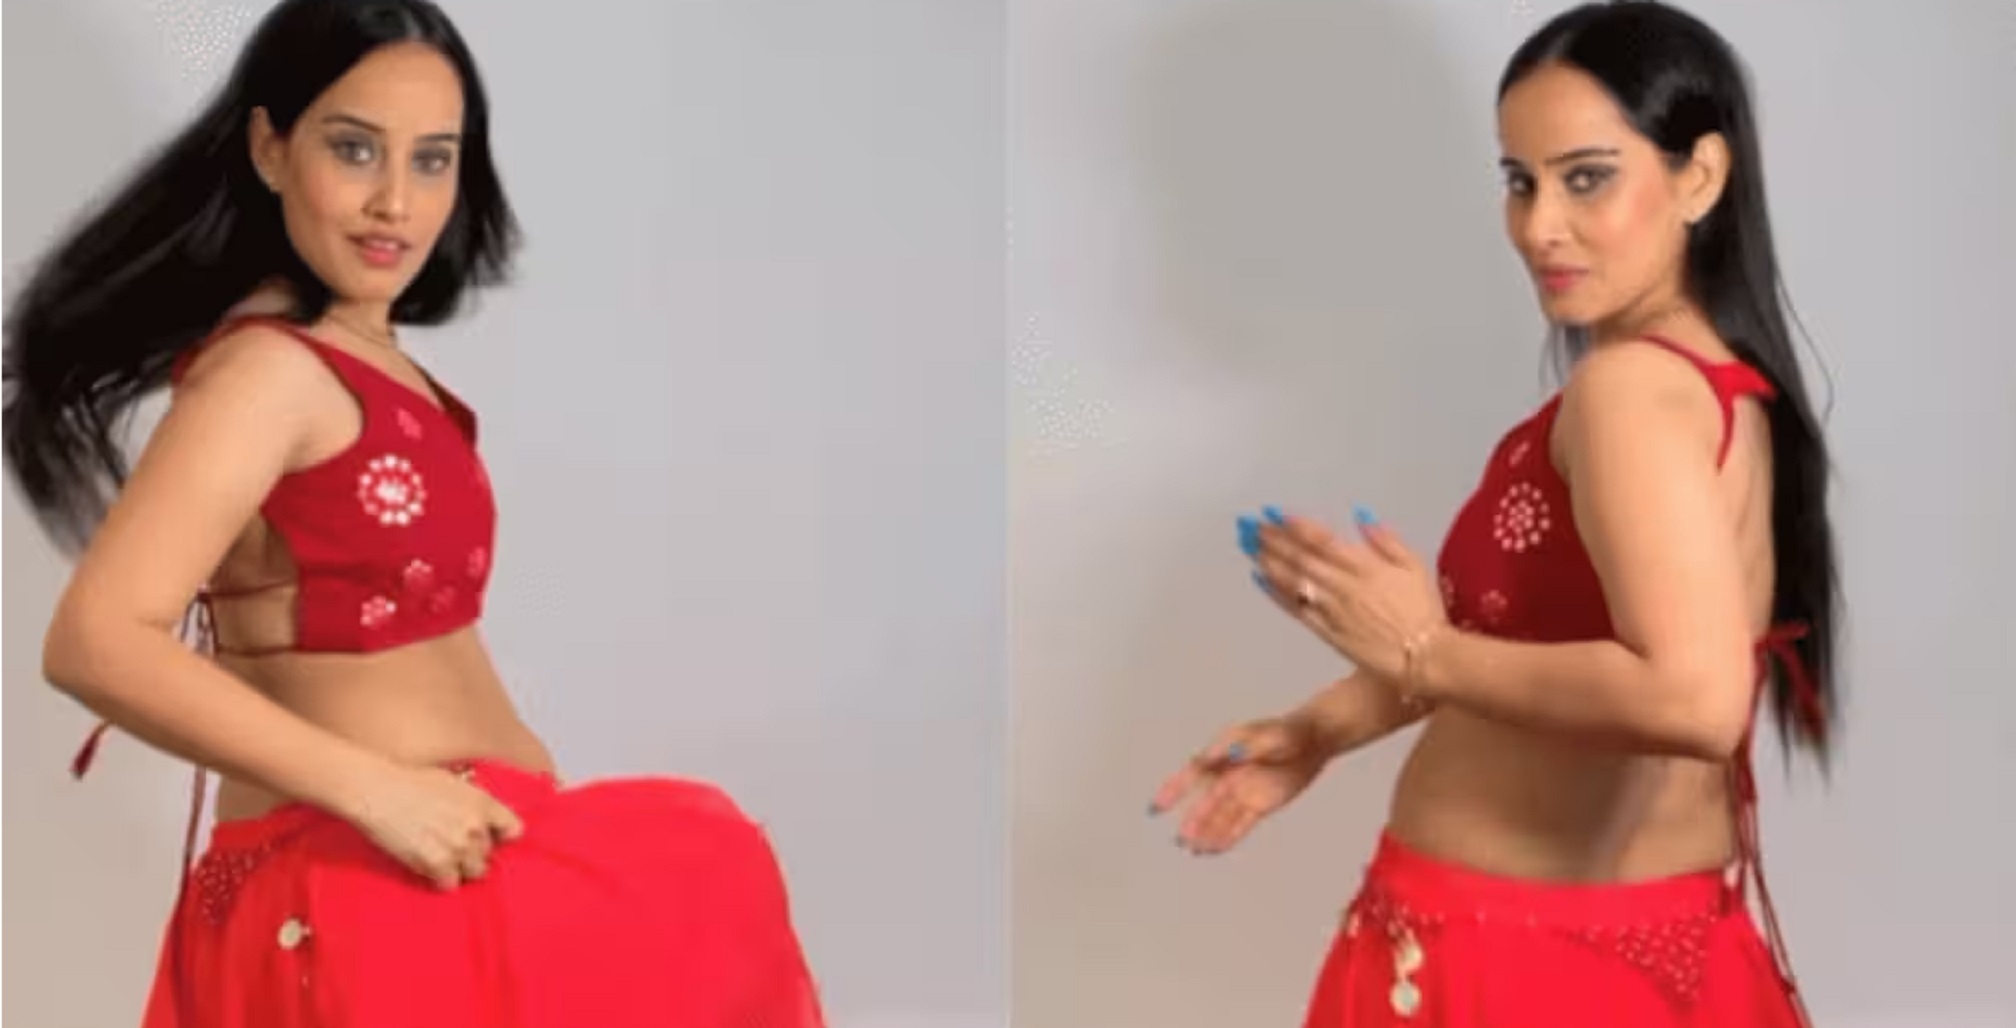 Watch : Viral girl wins hearts again with her Belly Dancing skills, leaves internet amazed